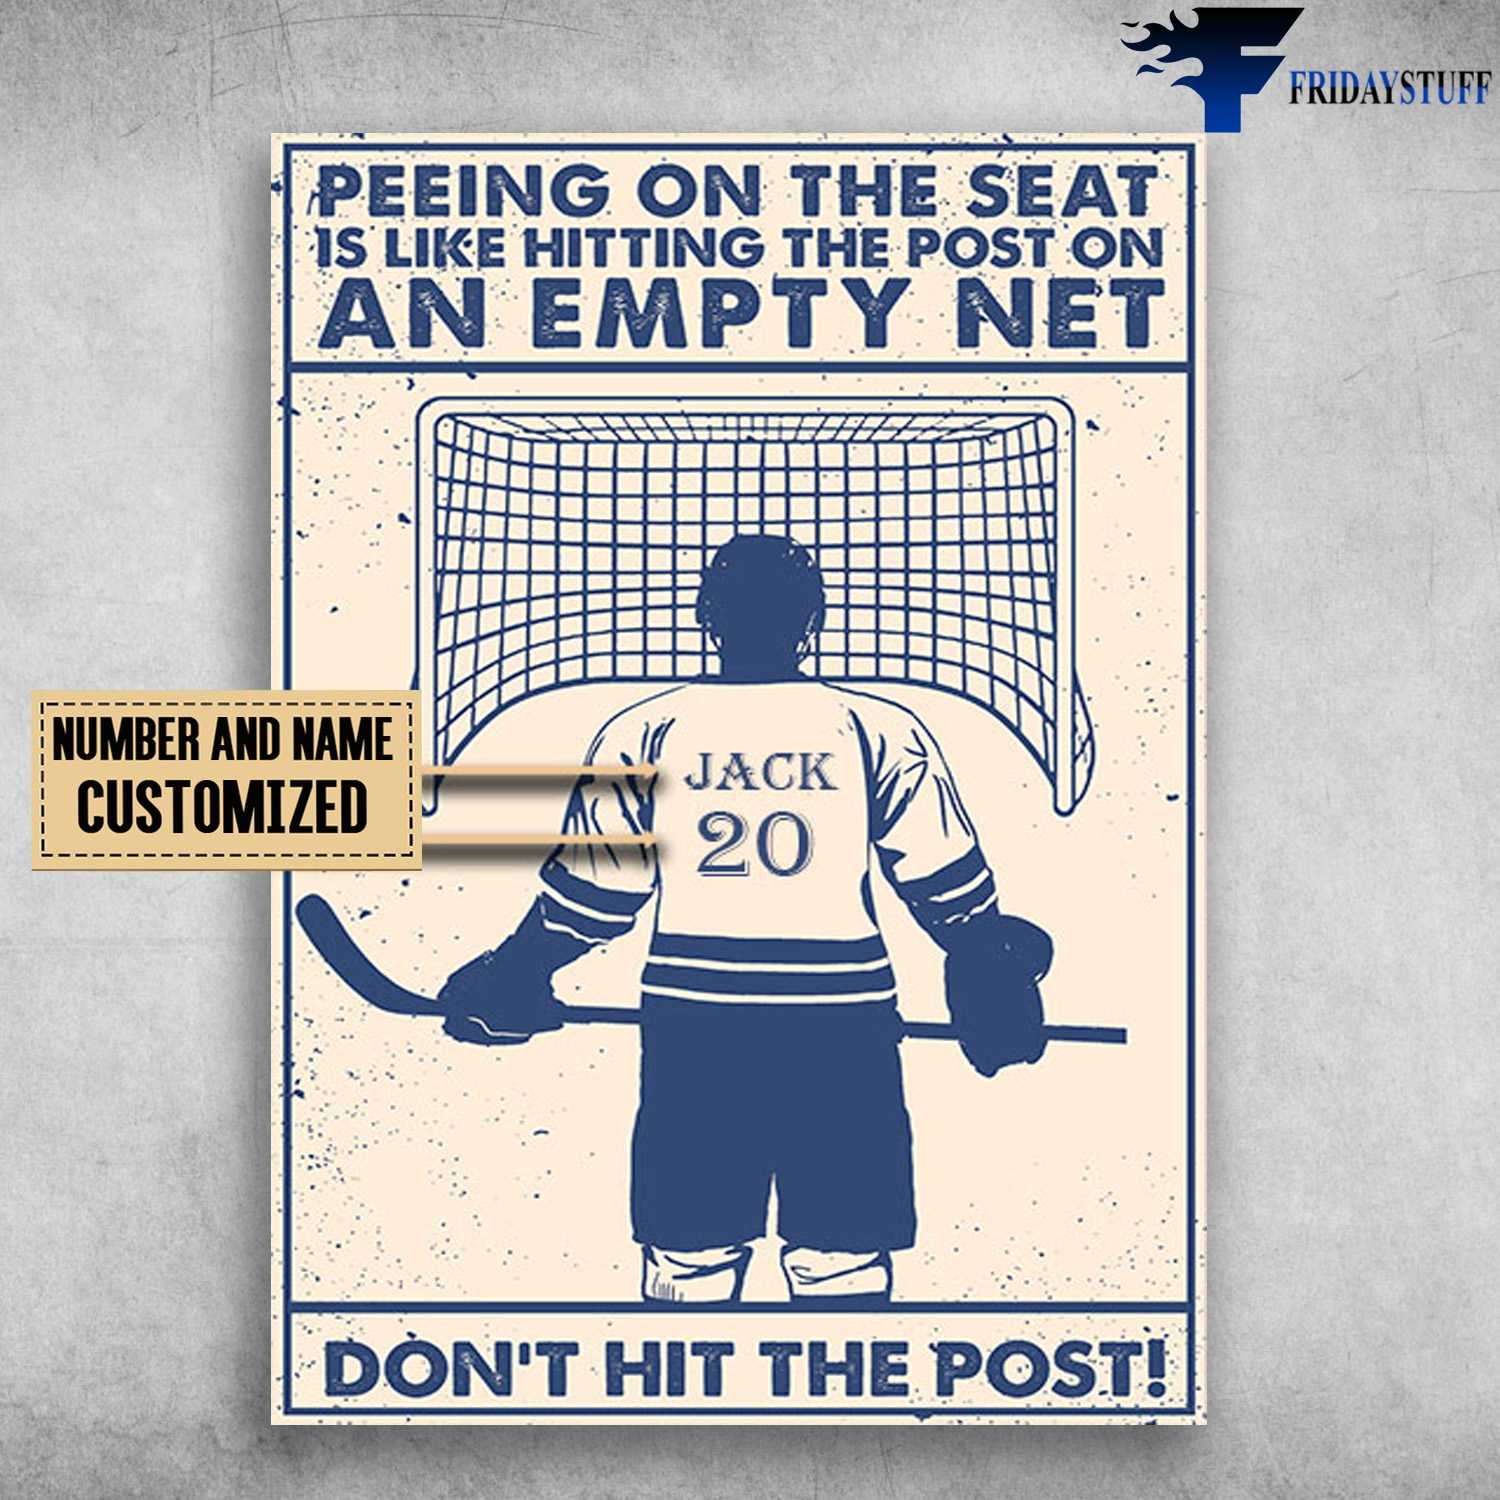 Hockey Player - Peeing On The Seat, Is Like Hitting The Post On An Empty Net, Don't Hit The Post